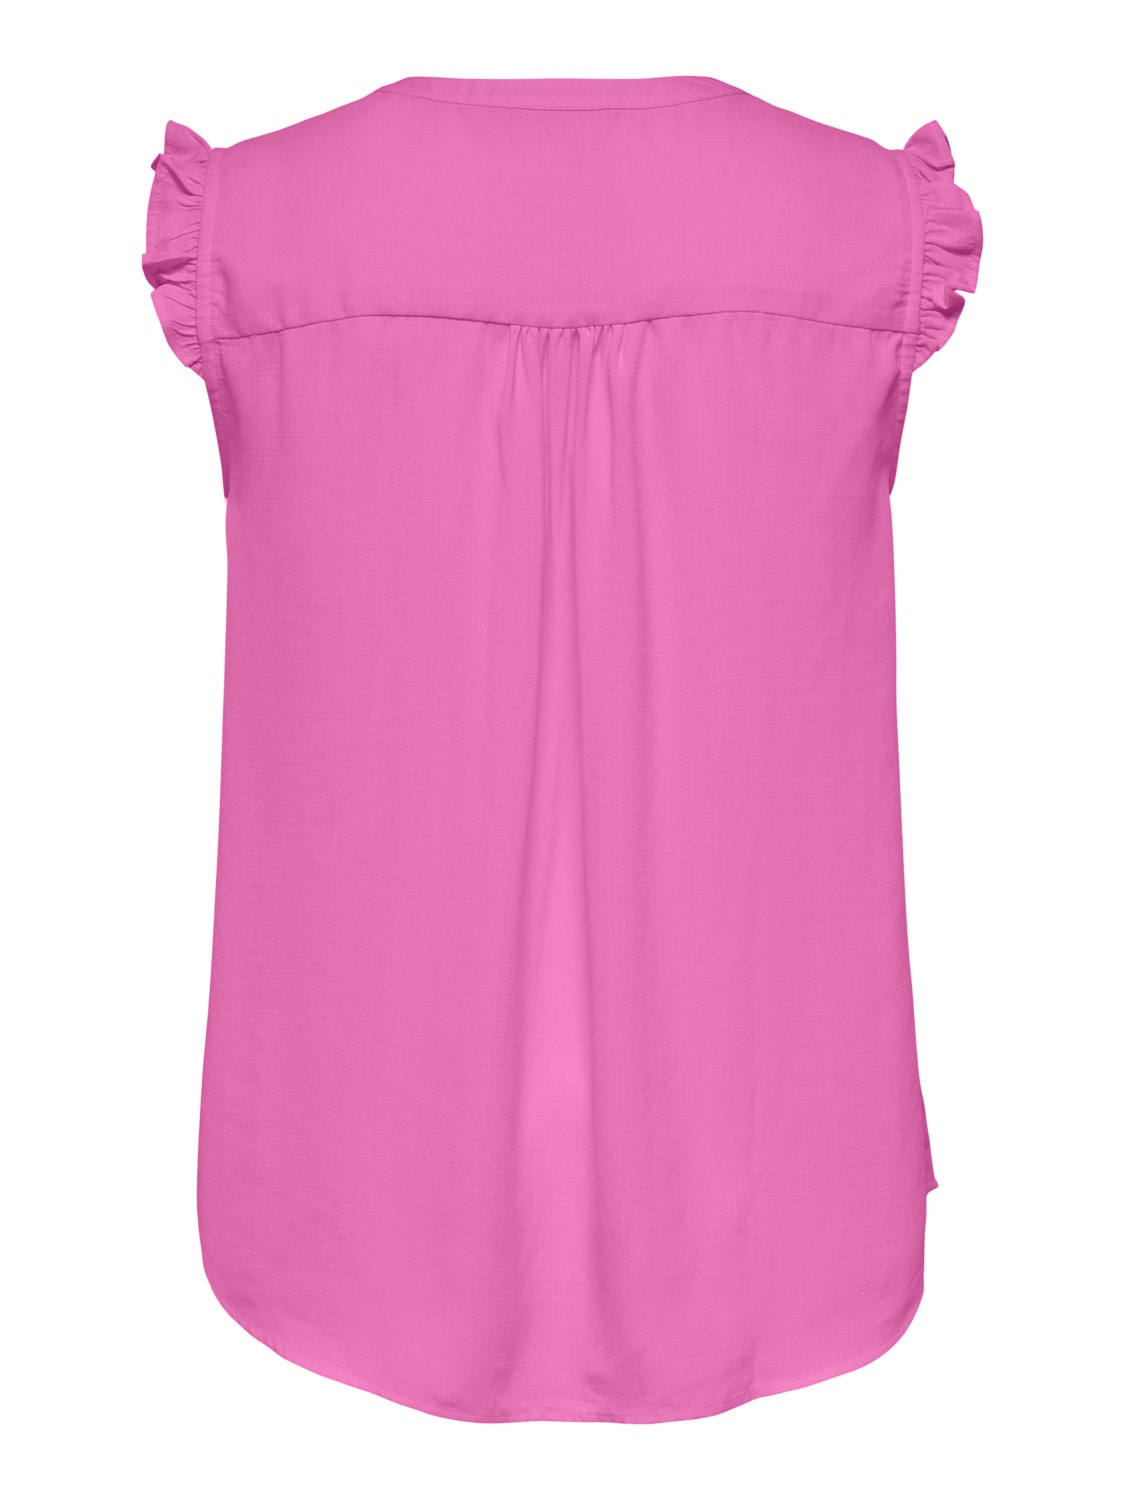 ONLY Curvy frill detail top -Super Pink - 15261520